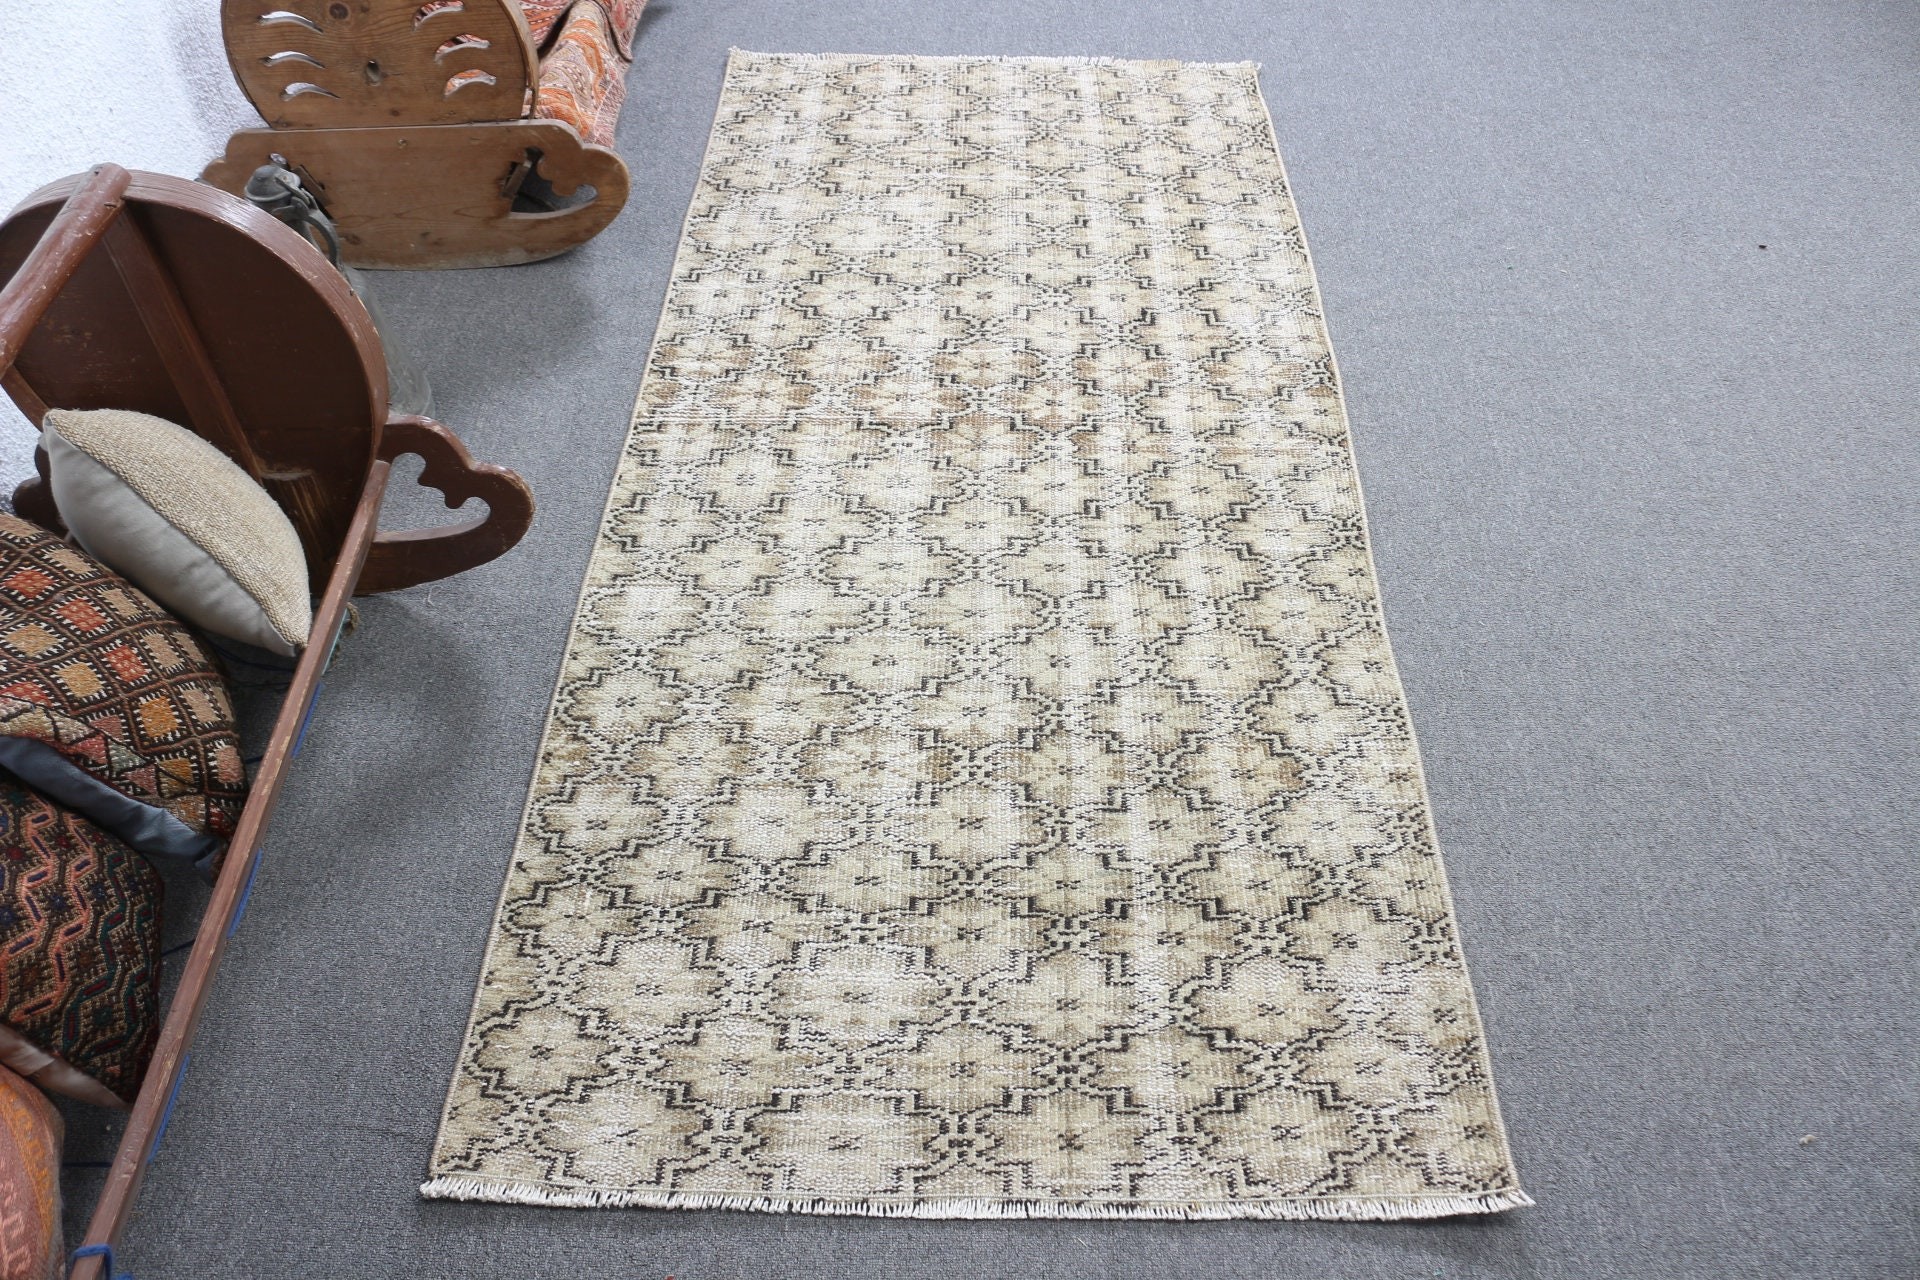 Vintage Rug, Bedroom Rug, Entry Rug, Beige Cool Rugs, Turkish Rugs, Oriental Rug, 3x6.2 ft Accent Rugs, Rugs for Entry, Anatolian Rug